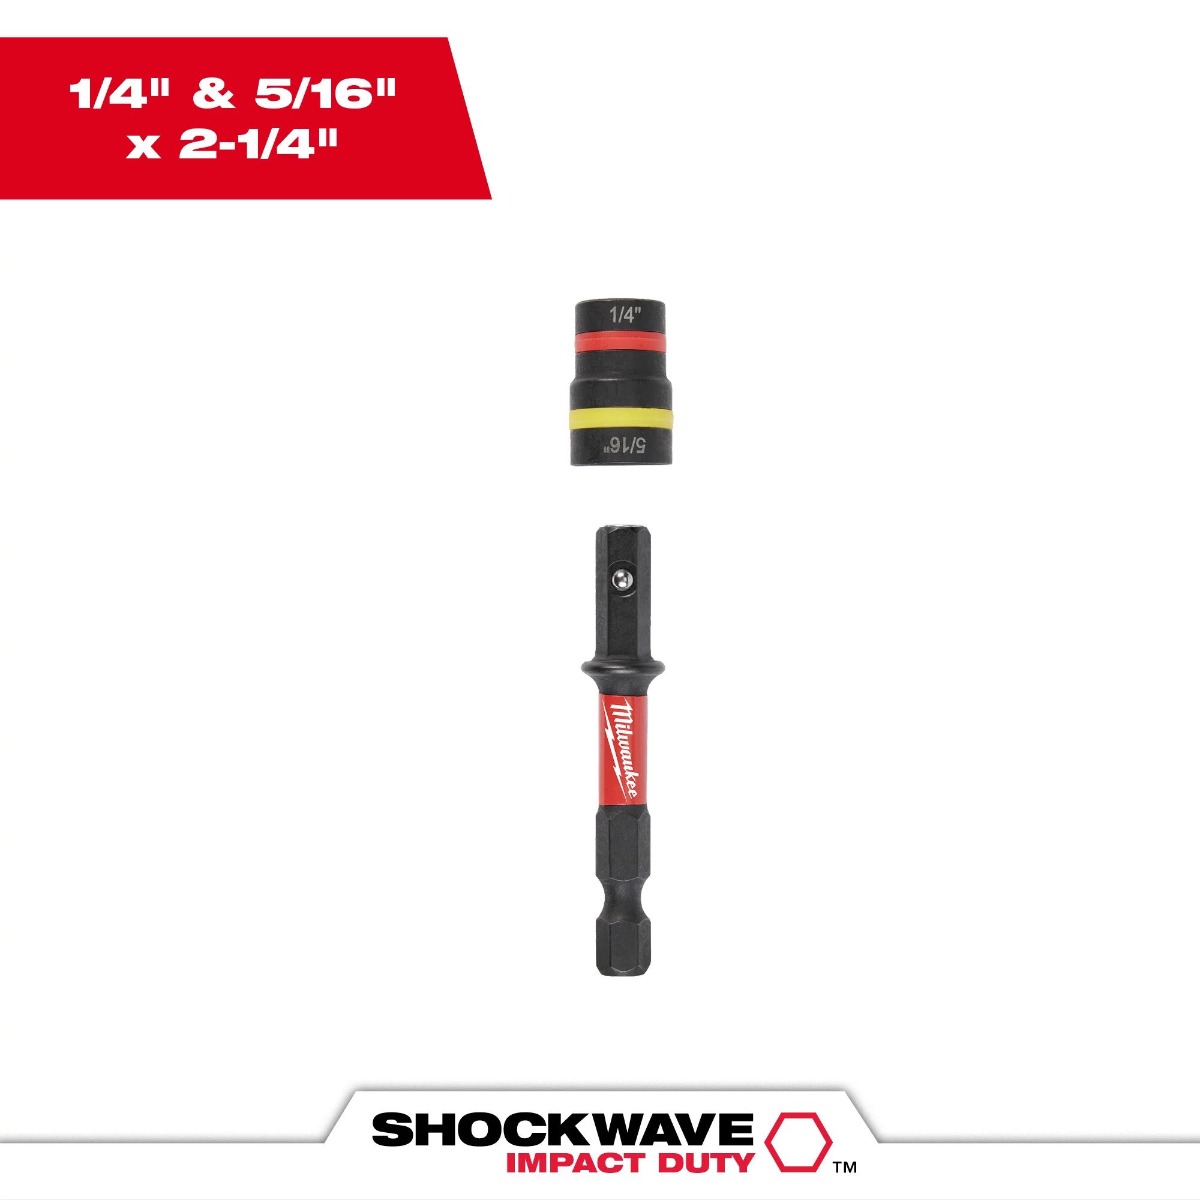 SHOCKWAVE Impact Duty™ QUIK-CLEAR™ 2-in-1 Magnetic Nut Drivers - 1/4" and 5/16"